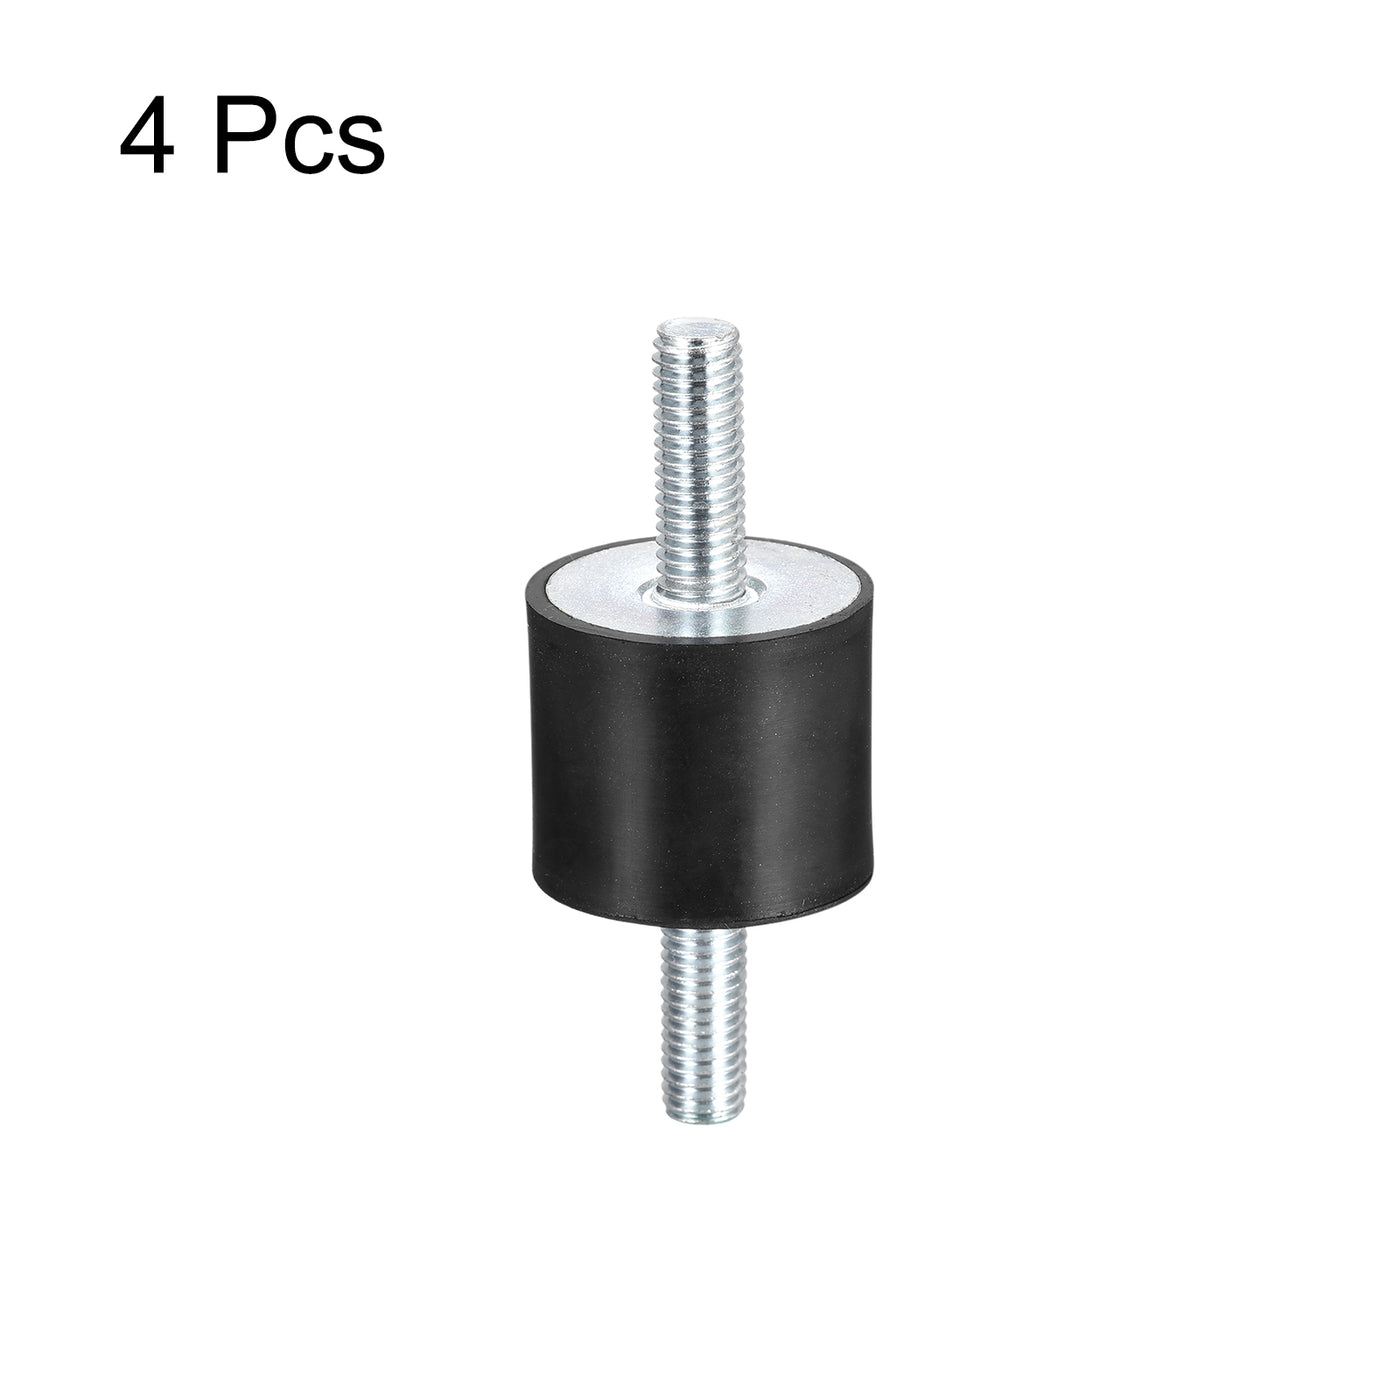 uxcell Uxcell Rubber Mounts 4pcs M8x23mm Male Vibration Isolator Shock Absorber D30mmxH25mm